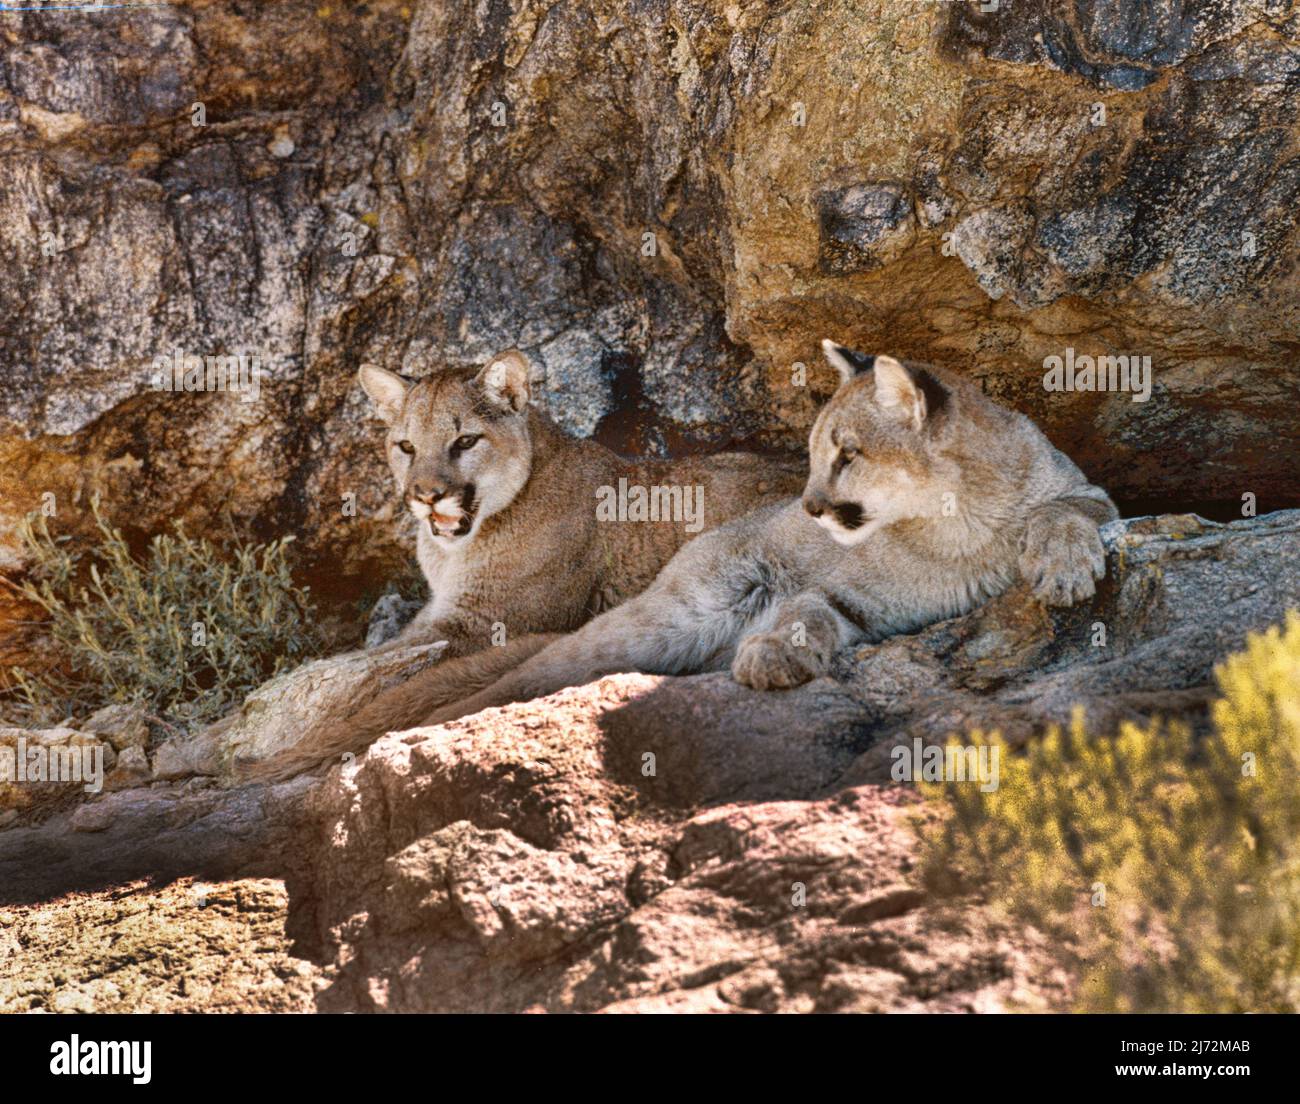 Two wild young cougars in the Arizona desert Stock Photo